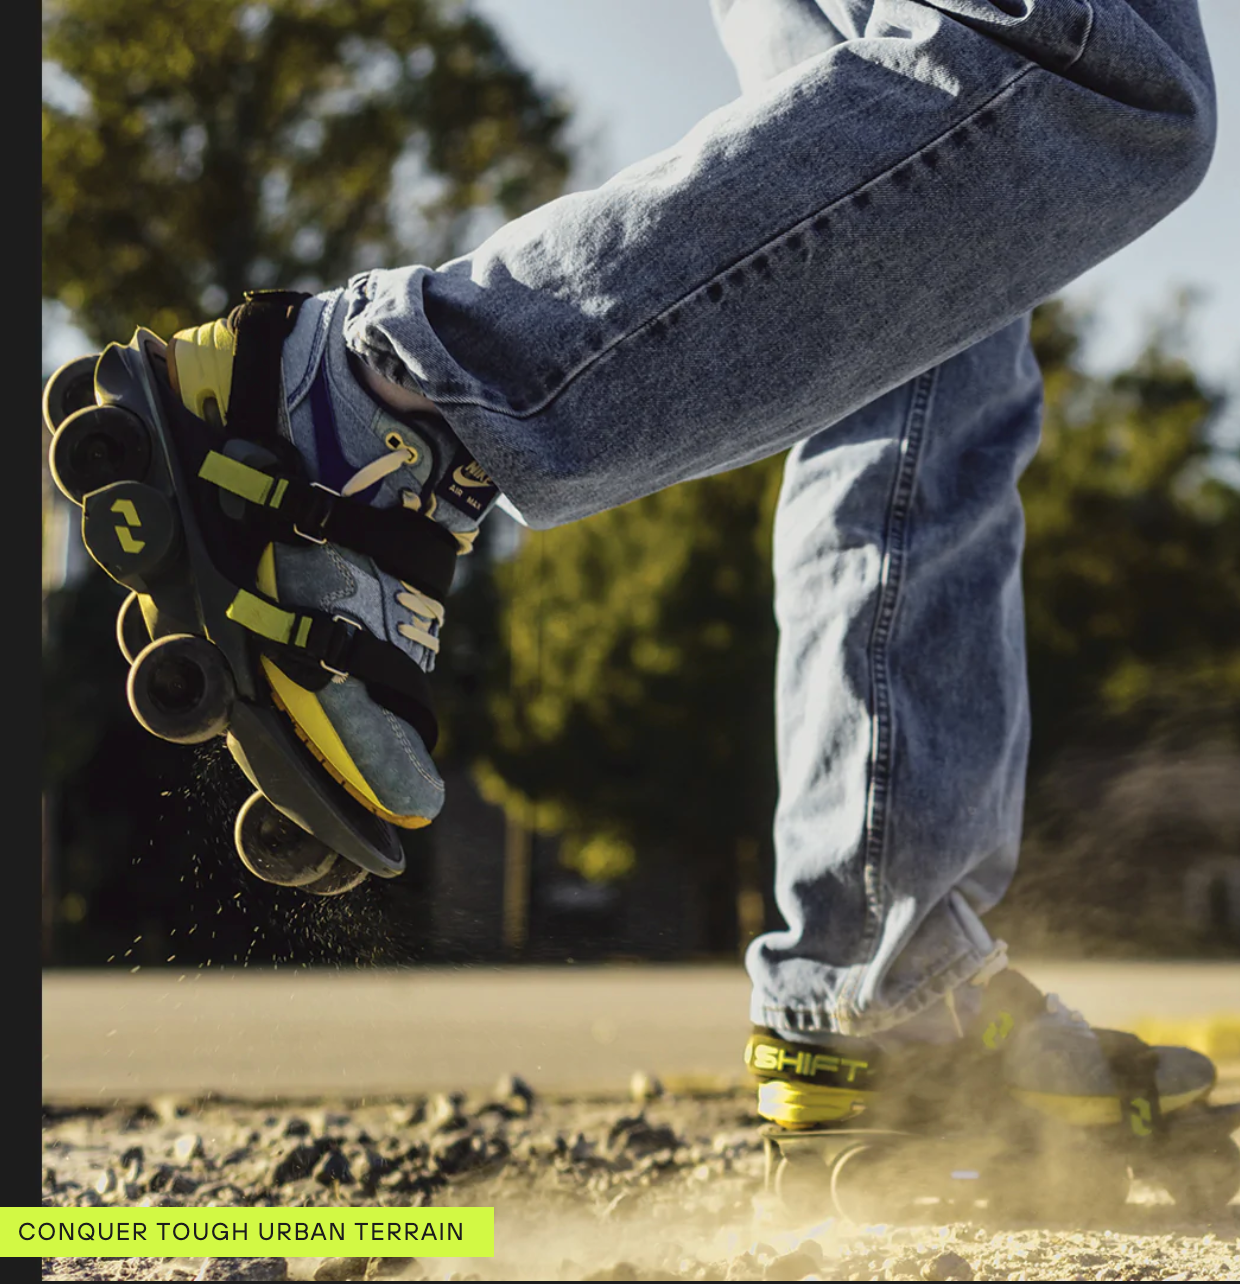 Turn your sneakers into electric roller skates with Airtrick E-Skates